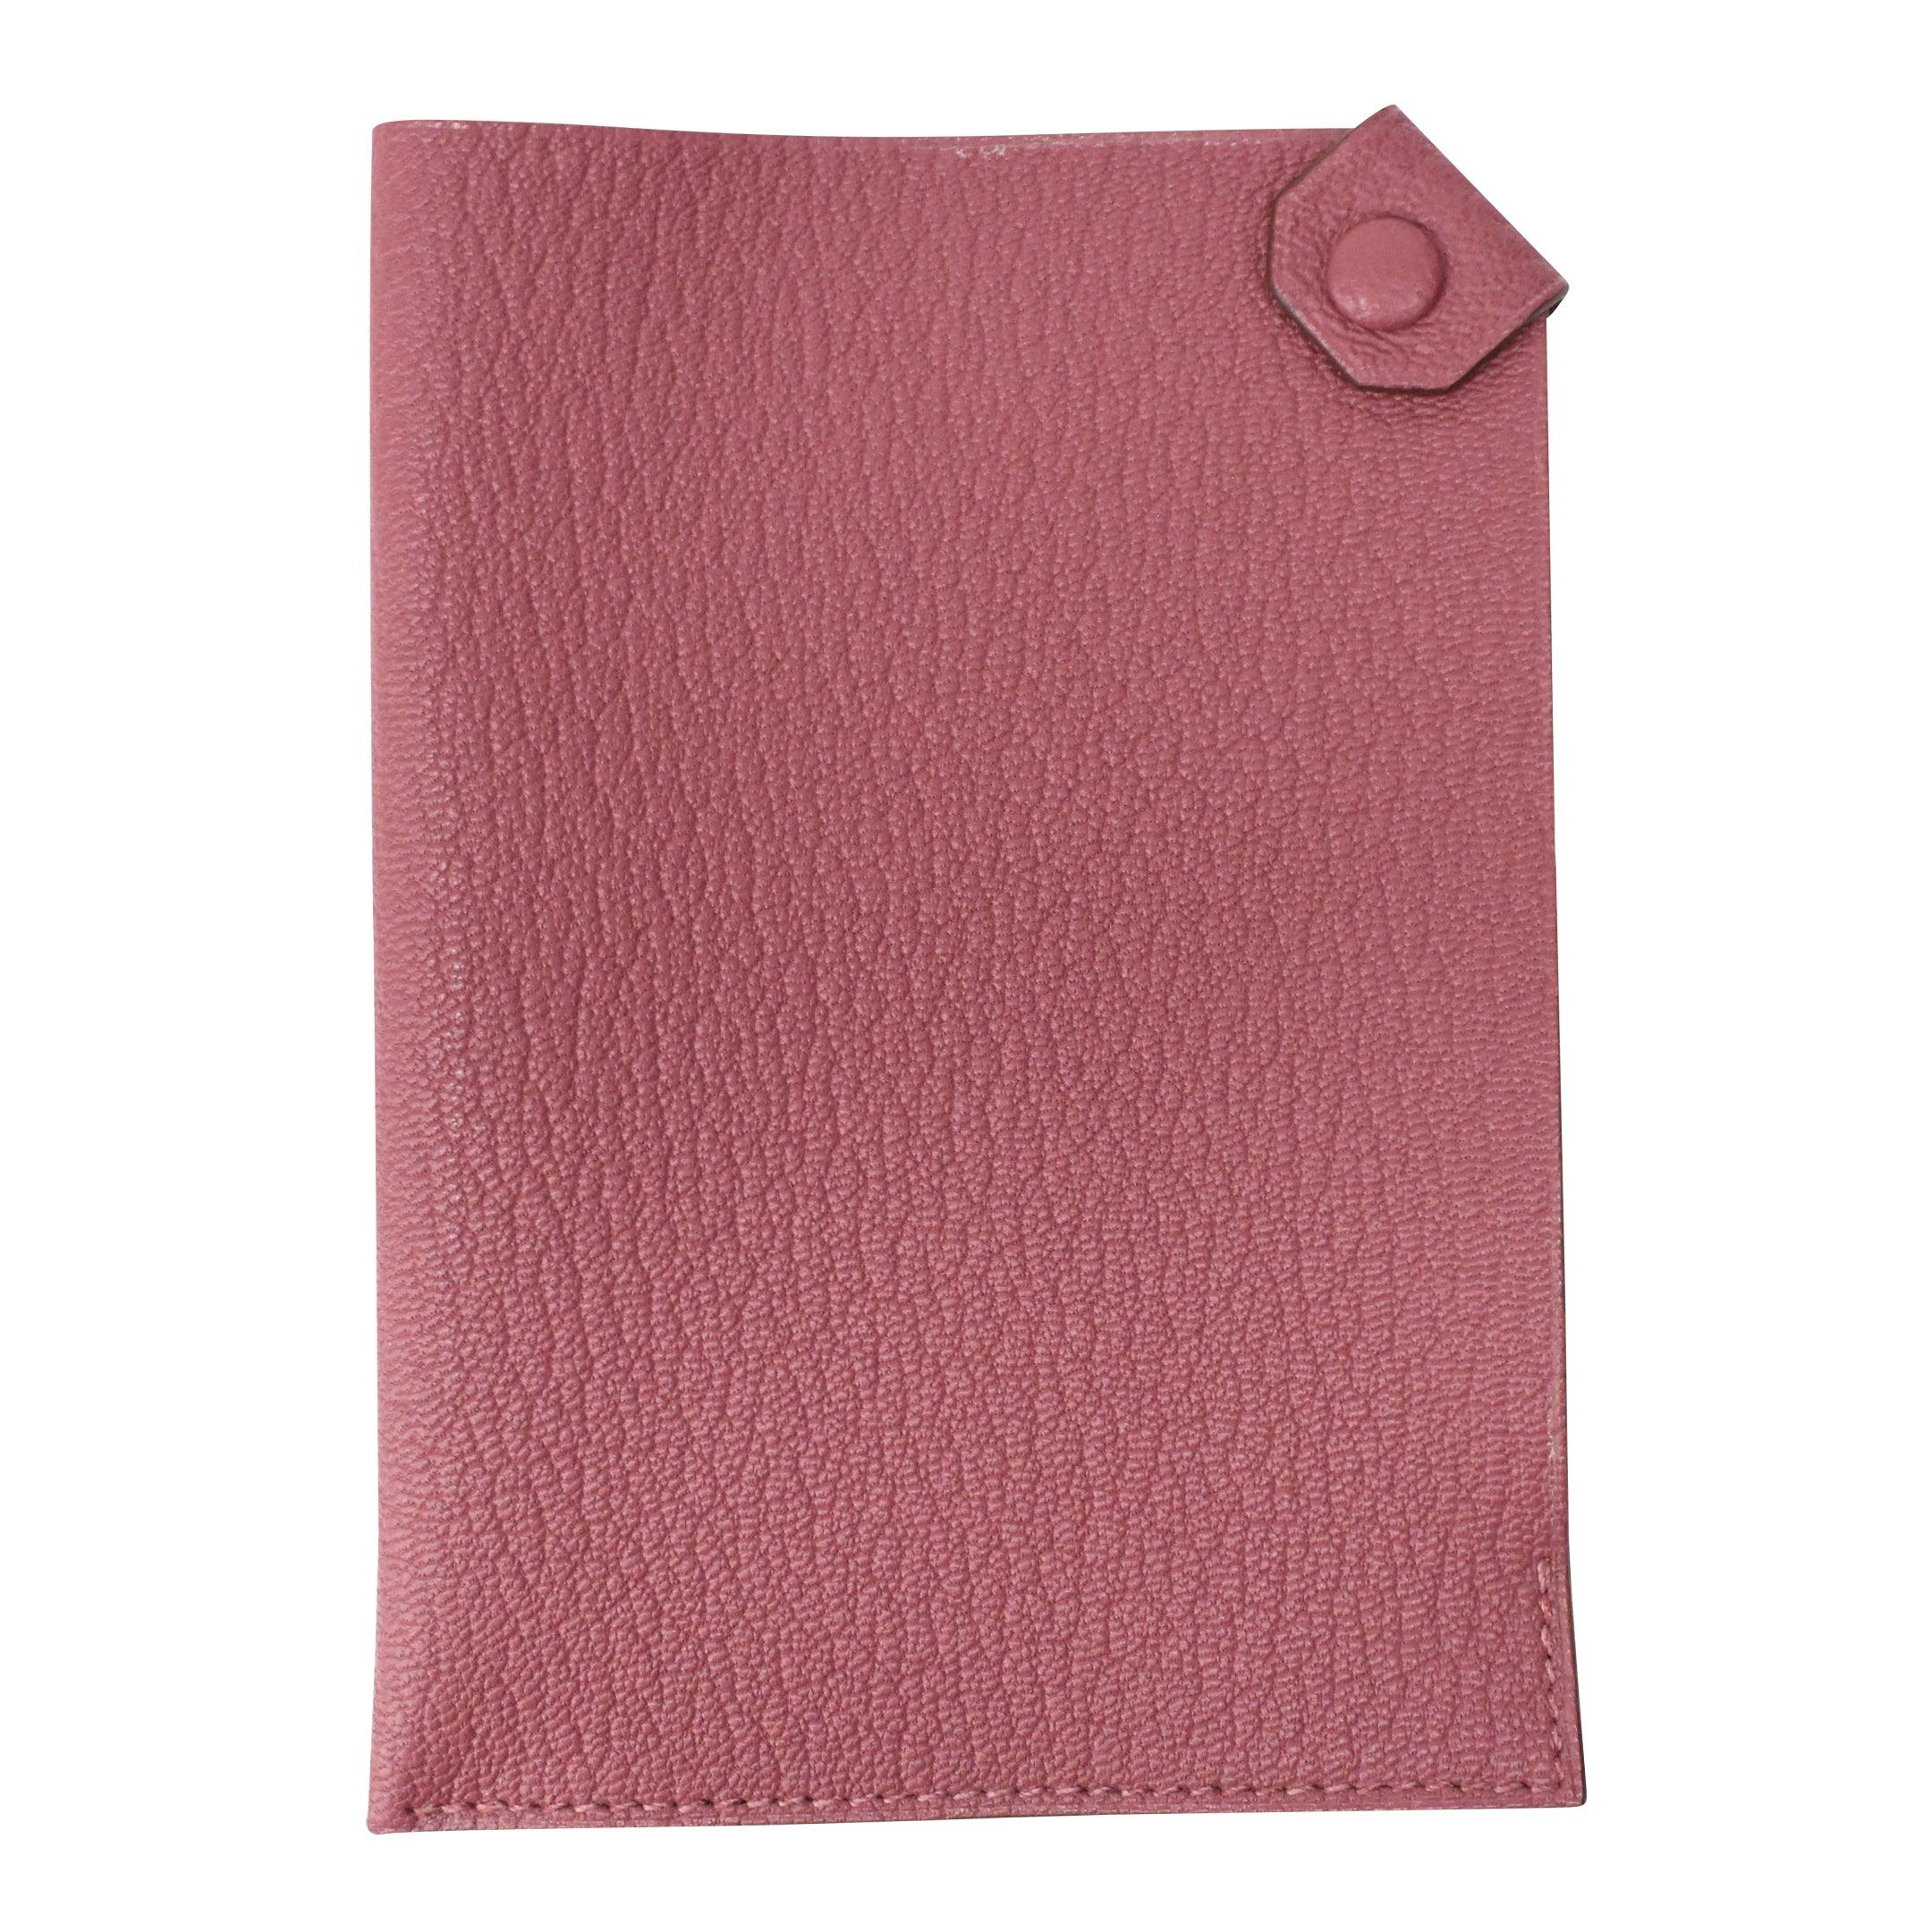 Hermes 'Tarmac PM Passport' Wallet - Fashionably Yours